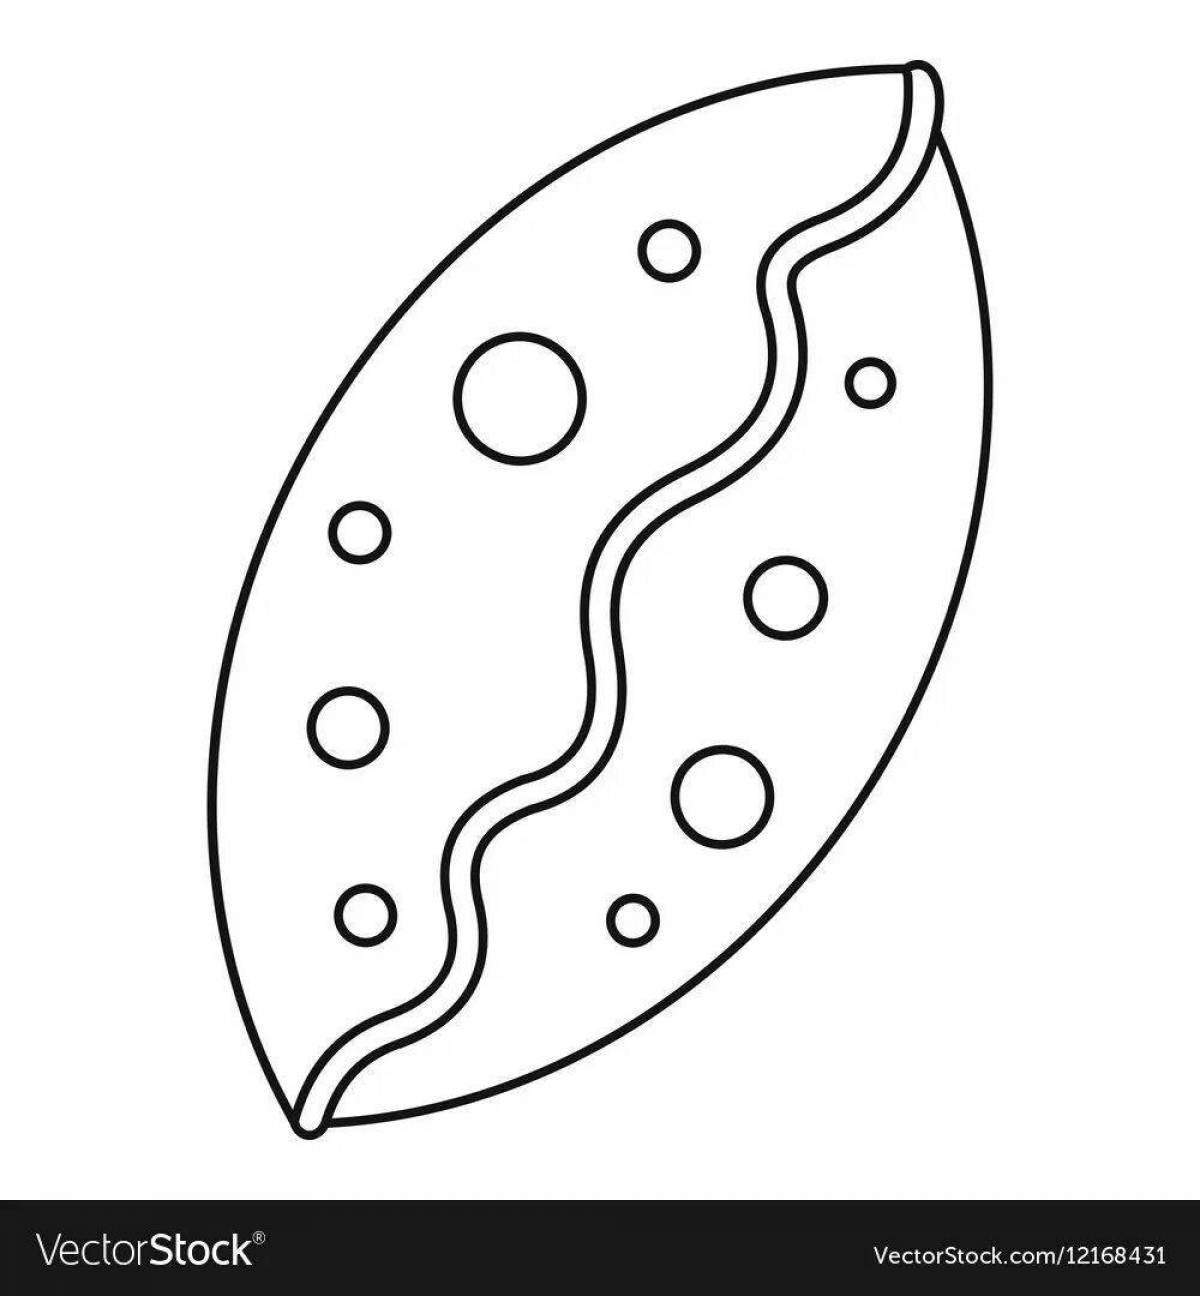 Sparkling Pie Coloring Page for Toddlers